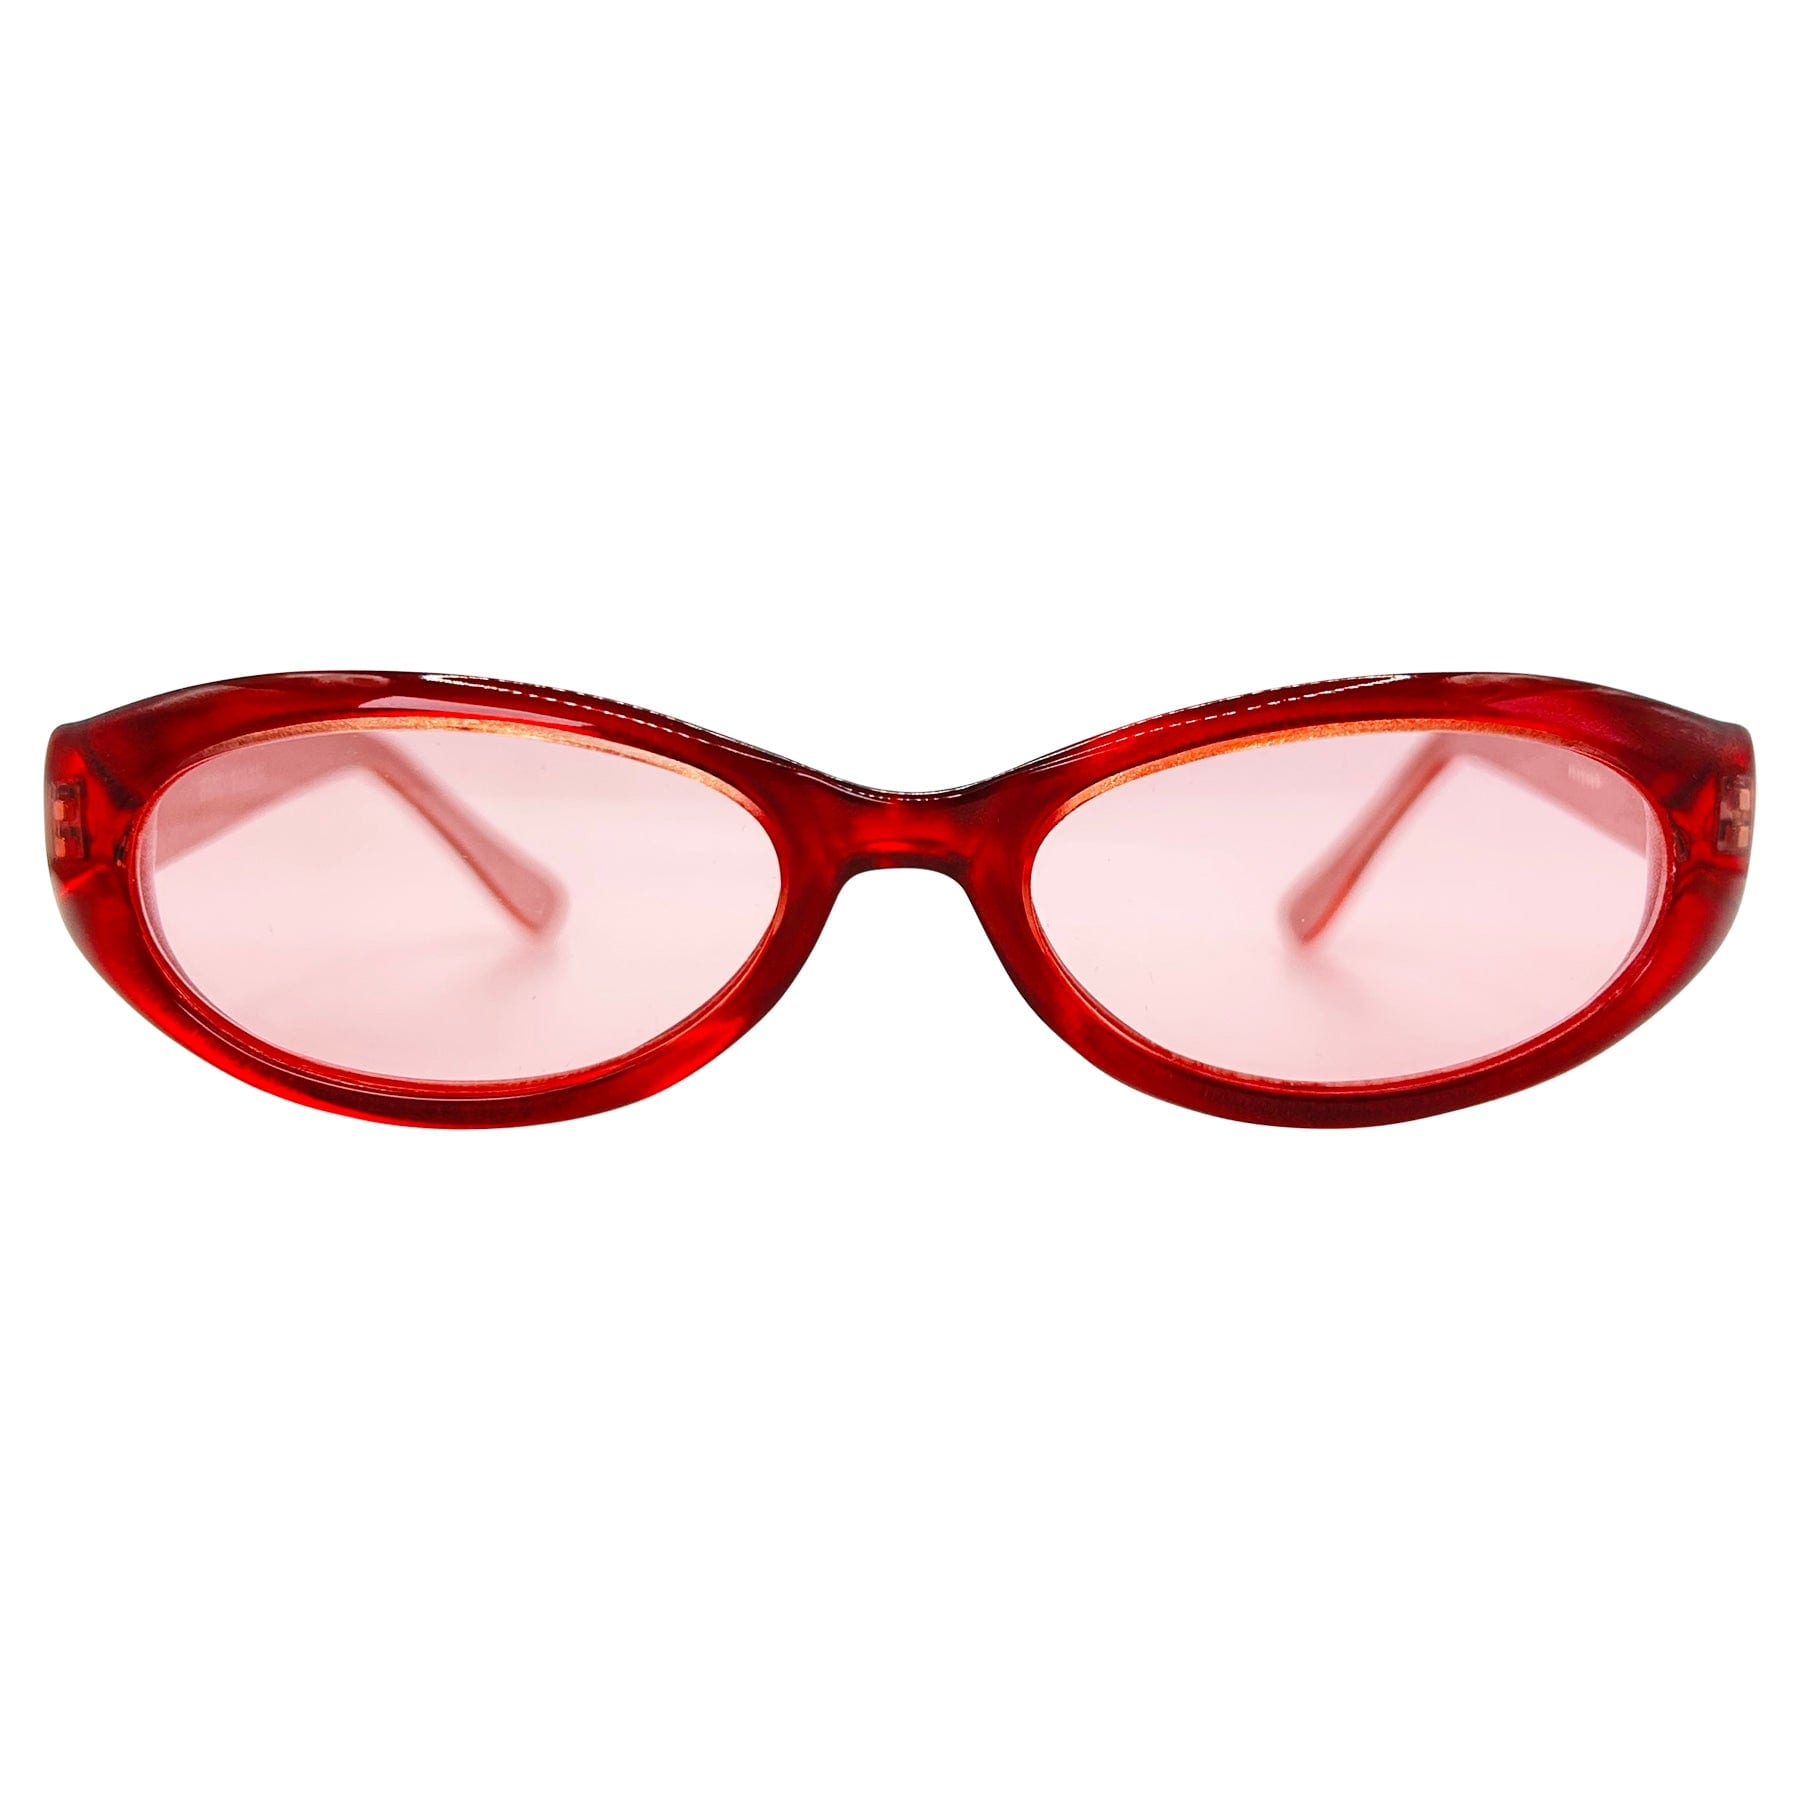 red sunglasses womens and unisex with a 90s style frame